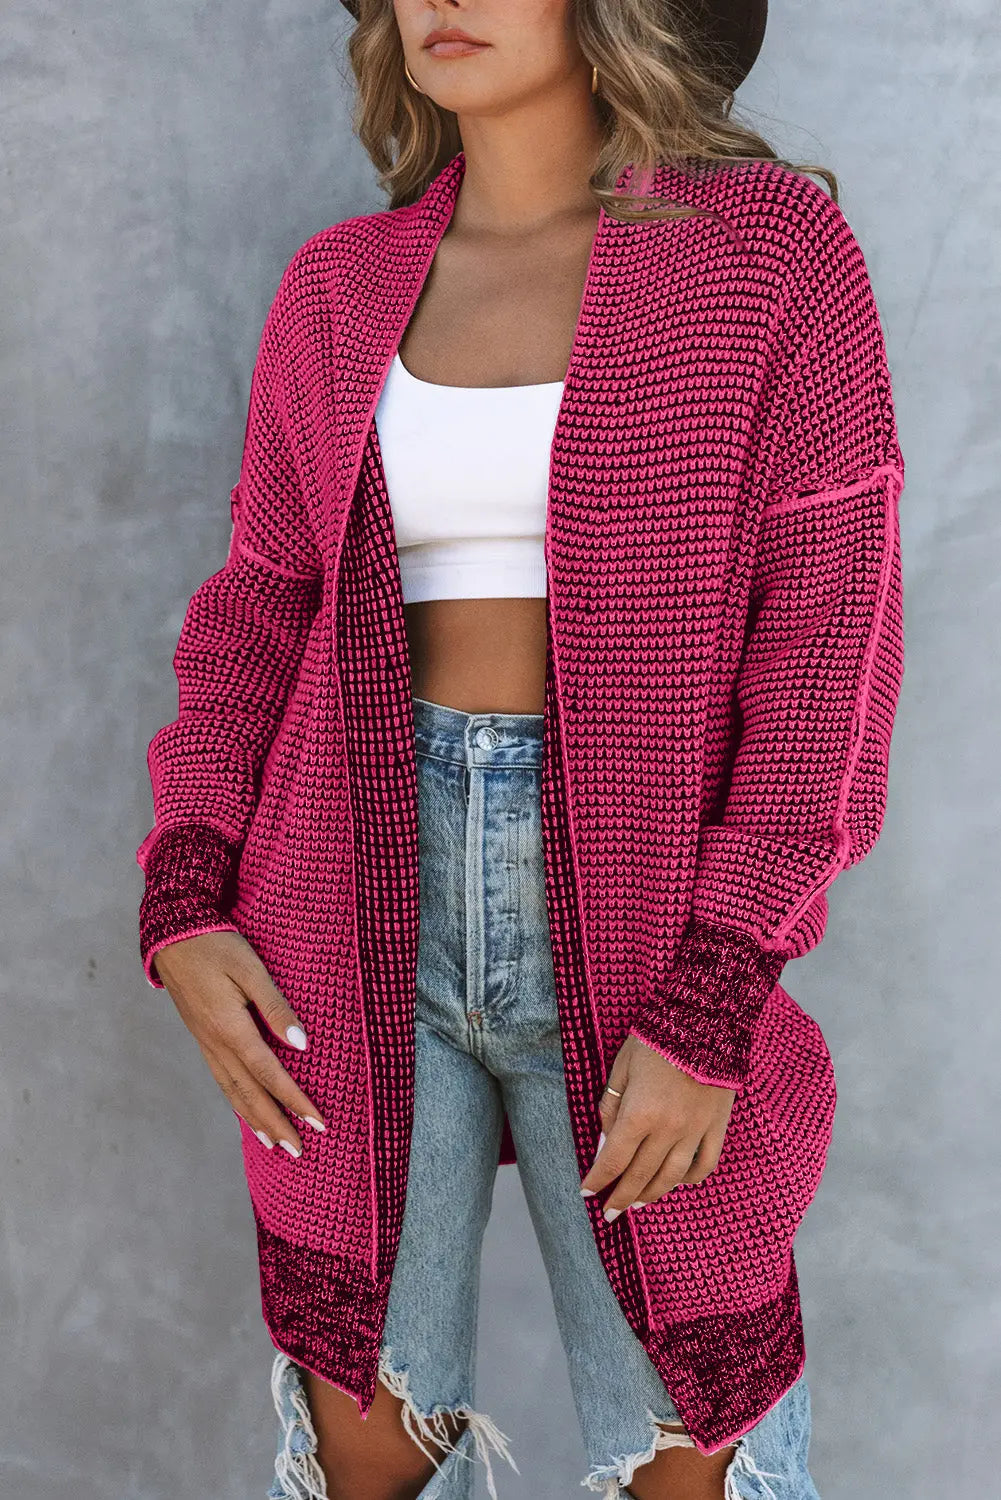 Grey plaid contrast trim open front cardigan - rose / s / 65% acrylic + 35% polyester - tops